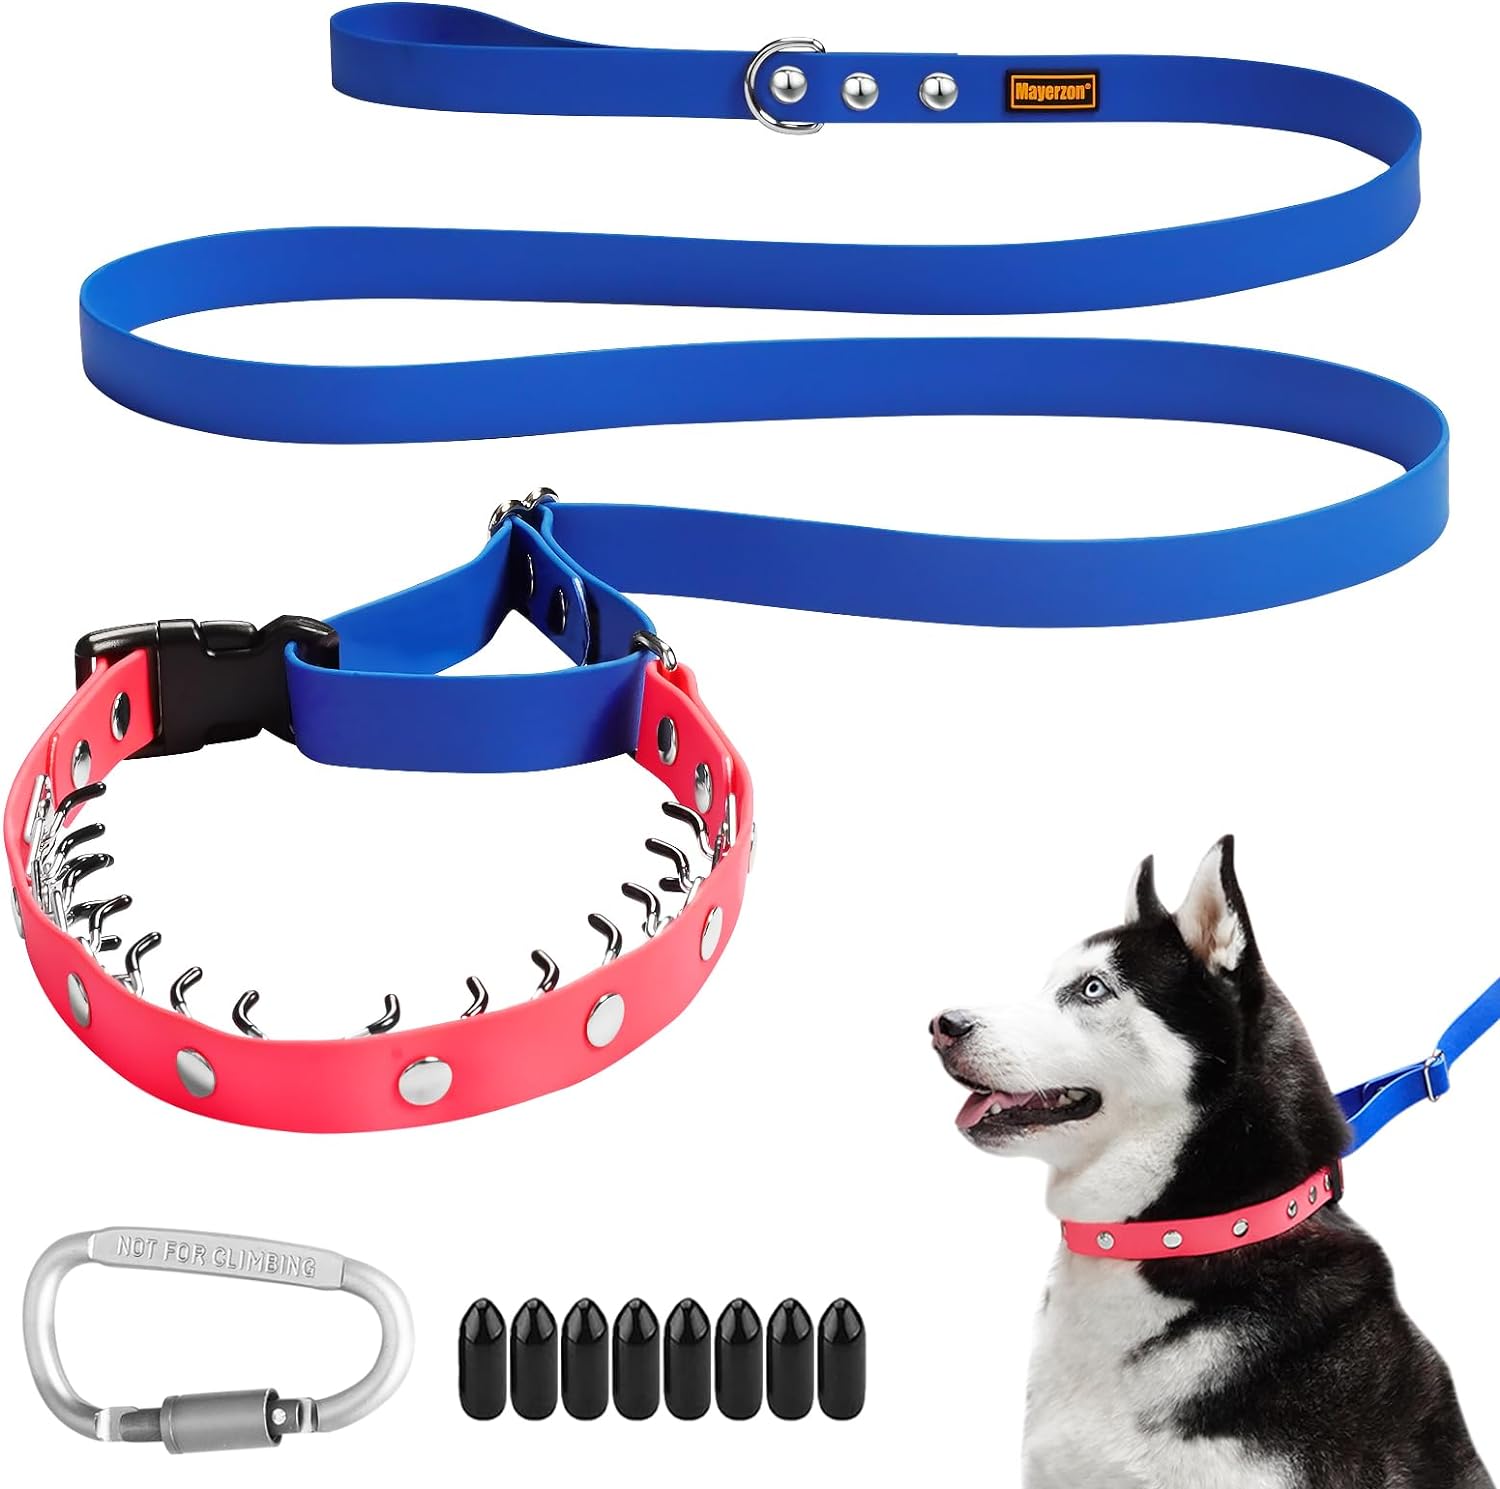 Mayerzon Martingale Collar, 2 in 1 No Pull Dog Collar and Leash for Small Medium Large Dogs, 6.5 FT x 1 Slip Leash for Outdoor Walking, Training, Heavy Duty and Easy to Use